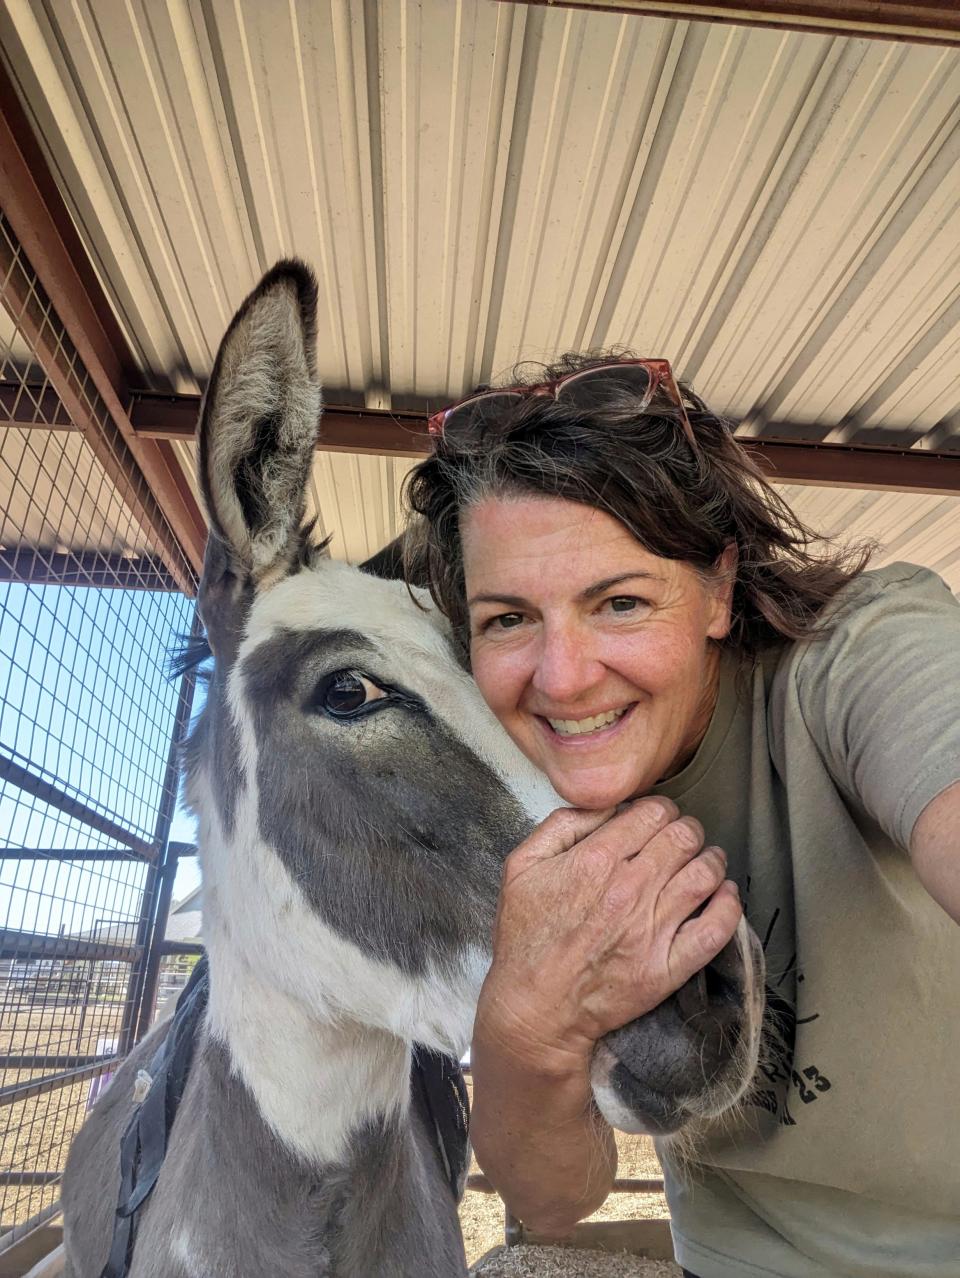 Alison McKee, owner of BTR Sourdough Bakery, poses with a photo with one of her donkeys.